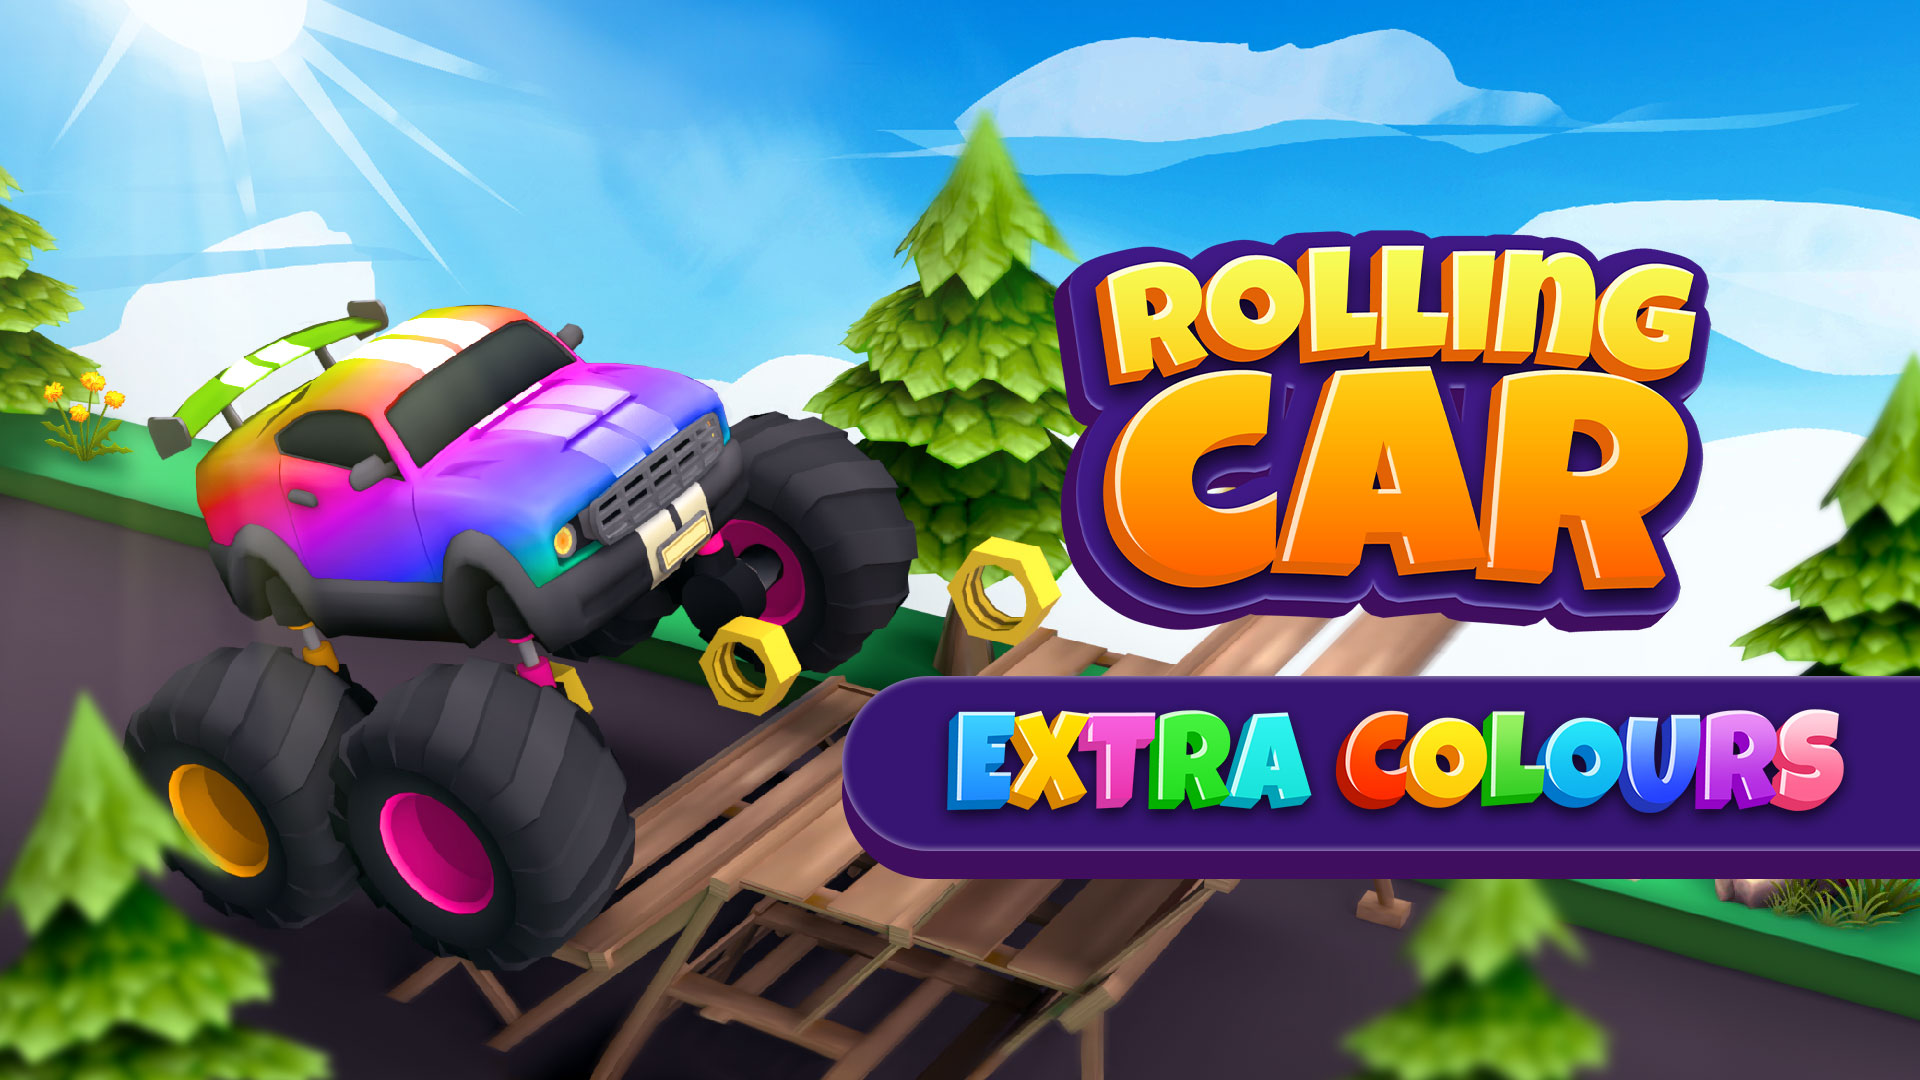 Rolling Car: Extra Colours